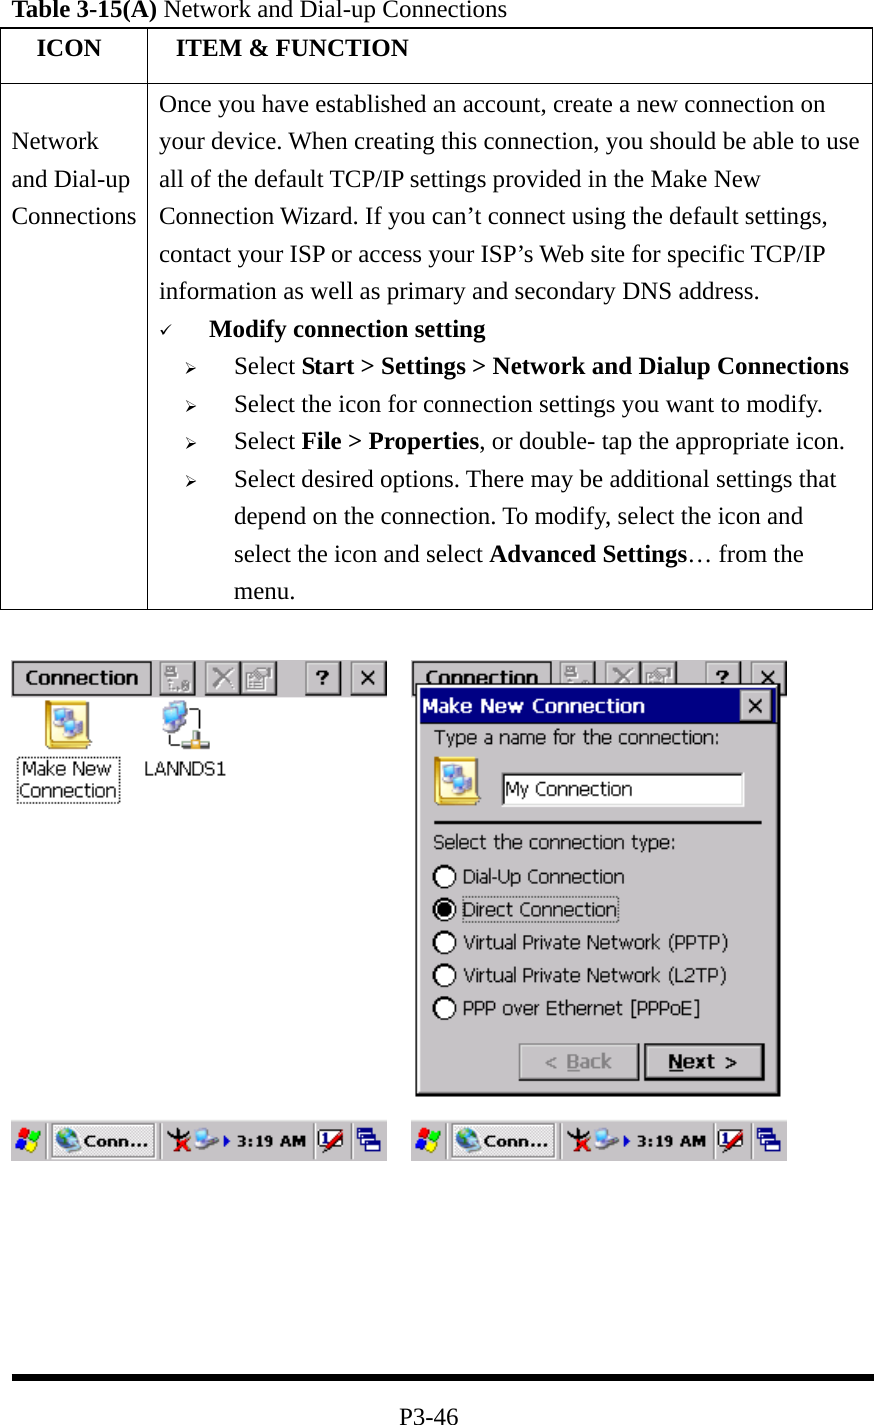 Table 3-15(A) Network and Dial-up Connections   ICON   ITEM &amp; FUNCTION  Network and Dial-up Connections Once you have established an account, create a new connection on your device. When creating this connection, you should be able to use all of the default TCP/IP settings provided in the Make New Connection Wizard. If you can’t connect using the default settings, contact your ISP or access your ISP’s Web site for specific TCP/IP information as well as primary and secondary DNS address.   Modify connection setting   Select Start &gt; Settings &gt; Network and Dialup Connections   Select the icon for connection settings you want to modify.   Select File &gt; Properties, or double- tap the appropriate icon.   Select desired options. There may be additional settings that depend on the connection. To modify, select the icon and select the icon and select Advanced Settings… from the menu.            P3-46 